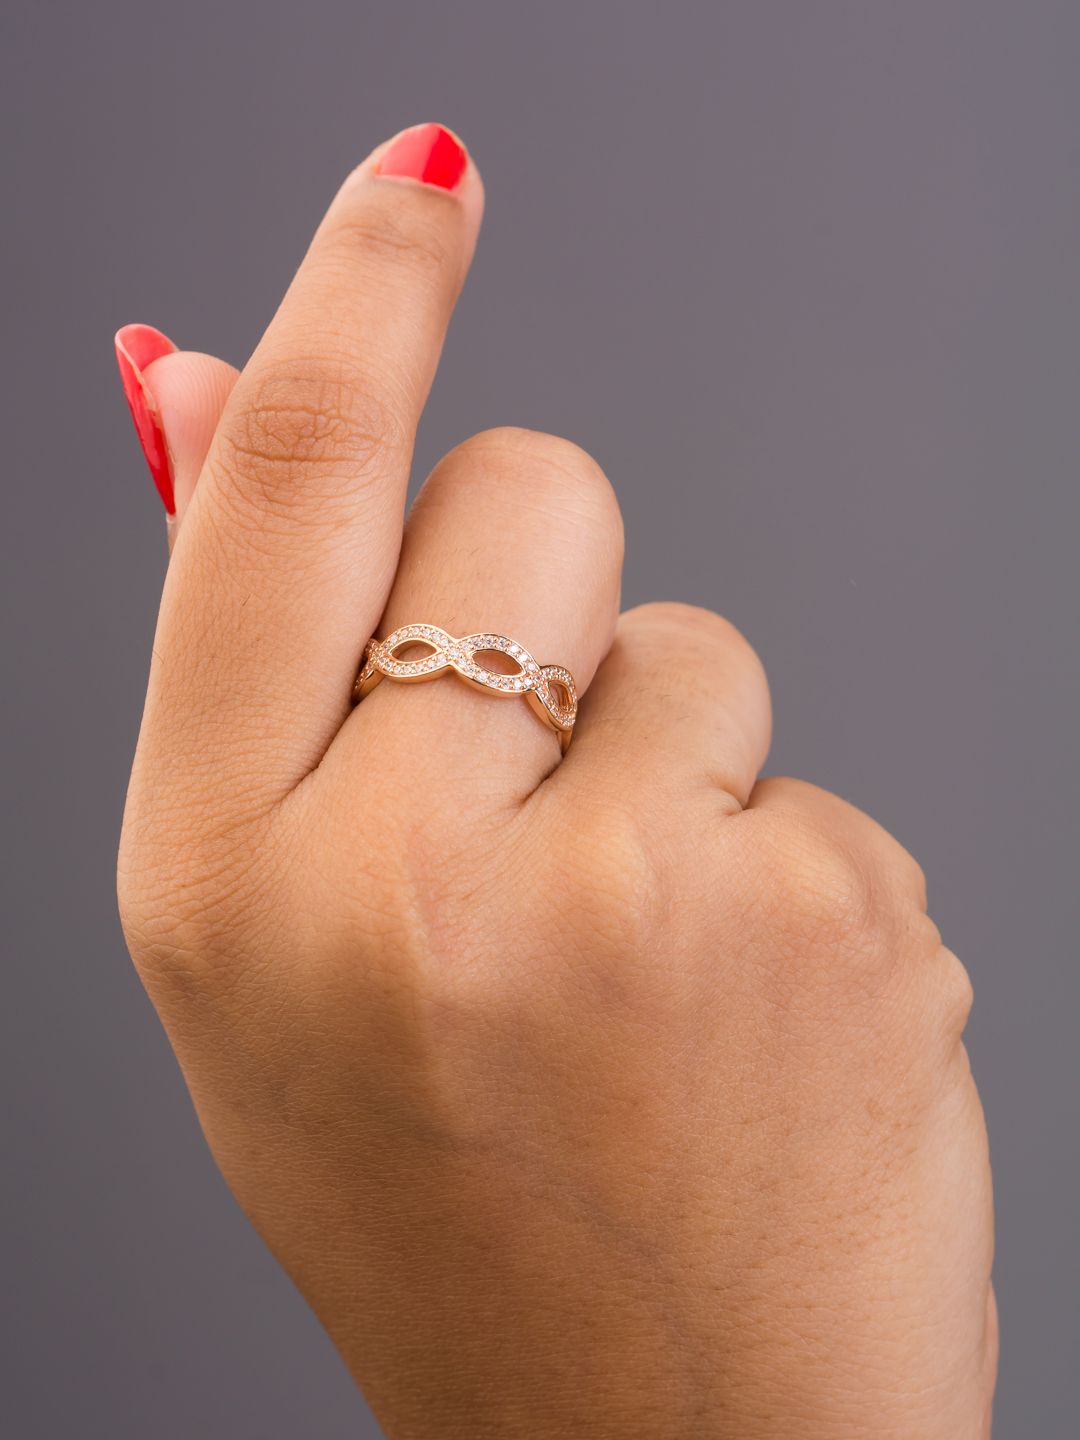 TALISMAN Rose Gold-Plated With Embedded White CZ Stones Handcrafted Infinity-Shaped Ring Price in India